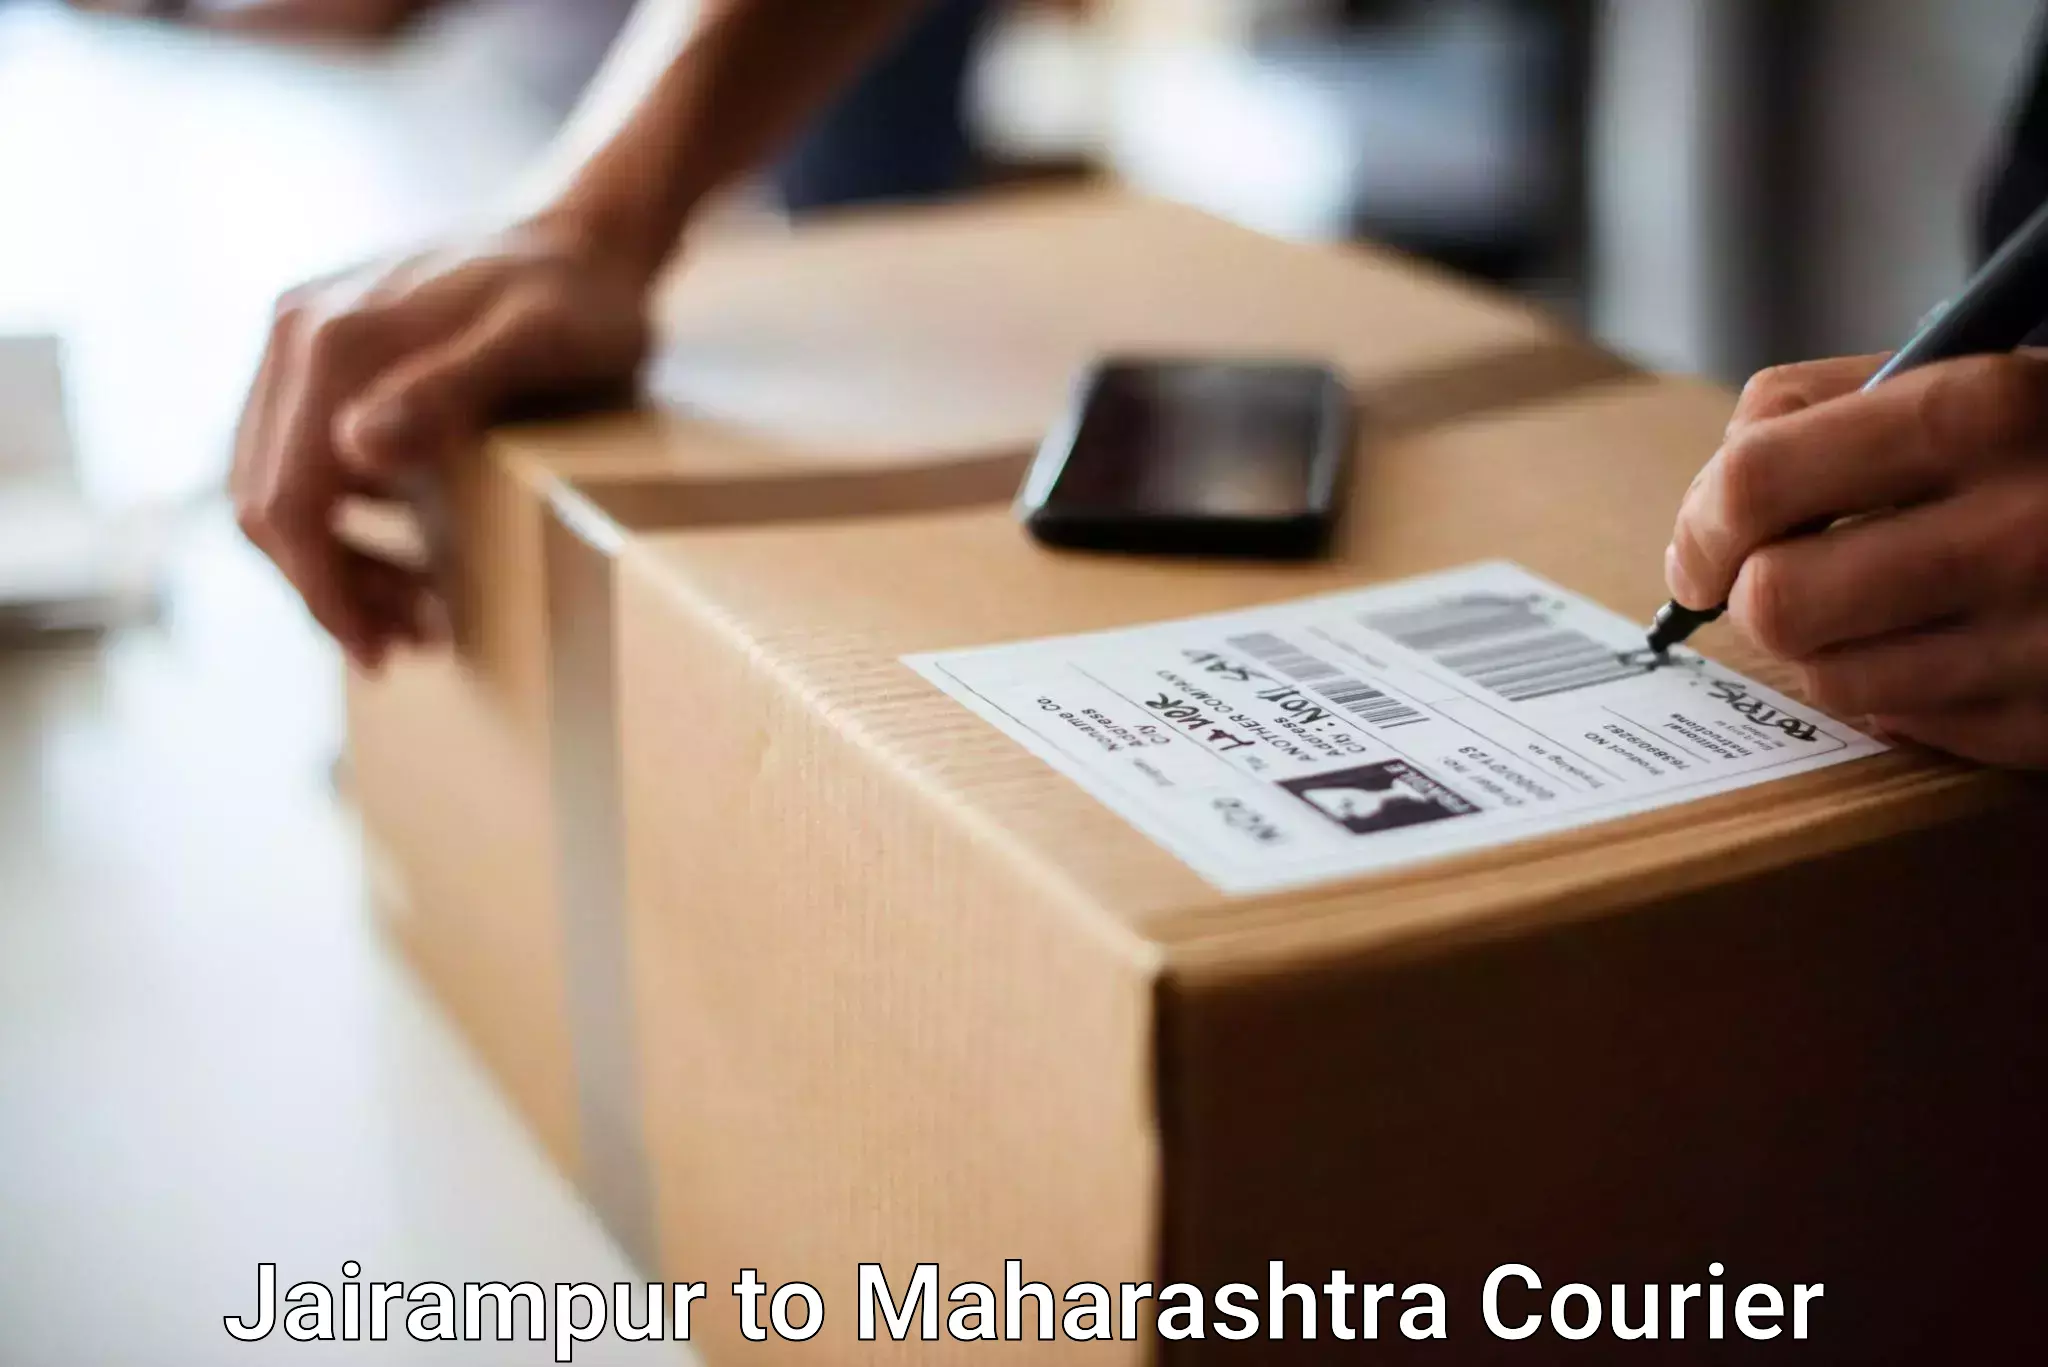 Personal effects shipping Jairampur to Palghar